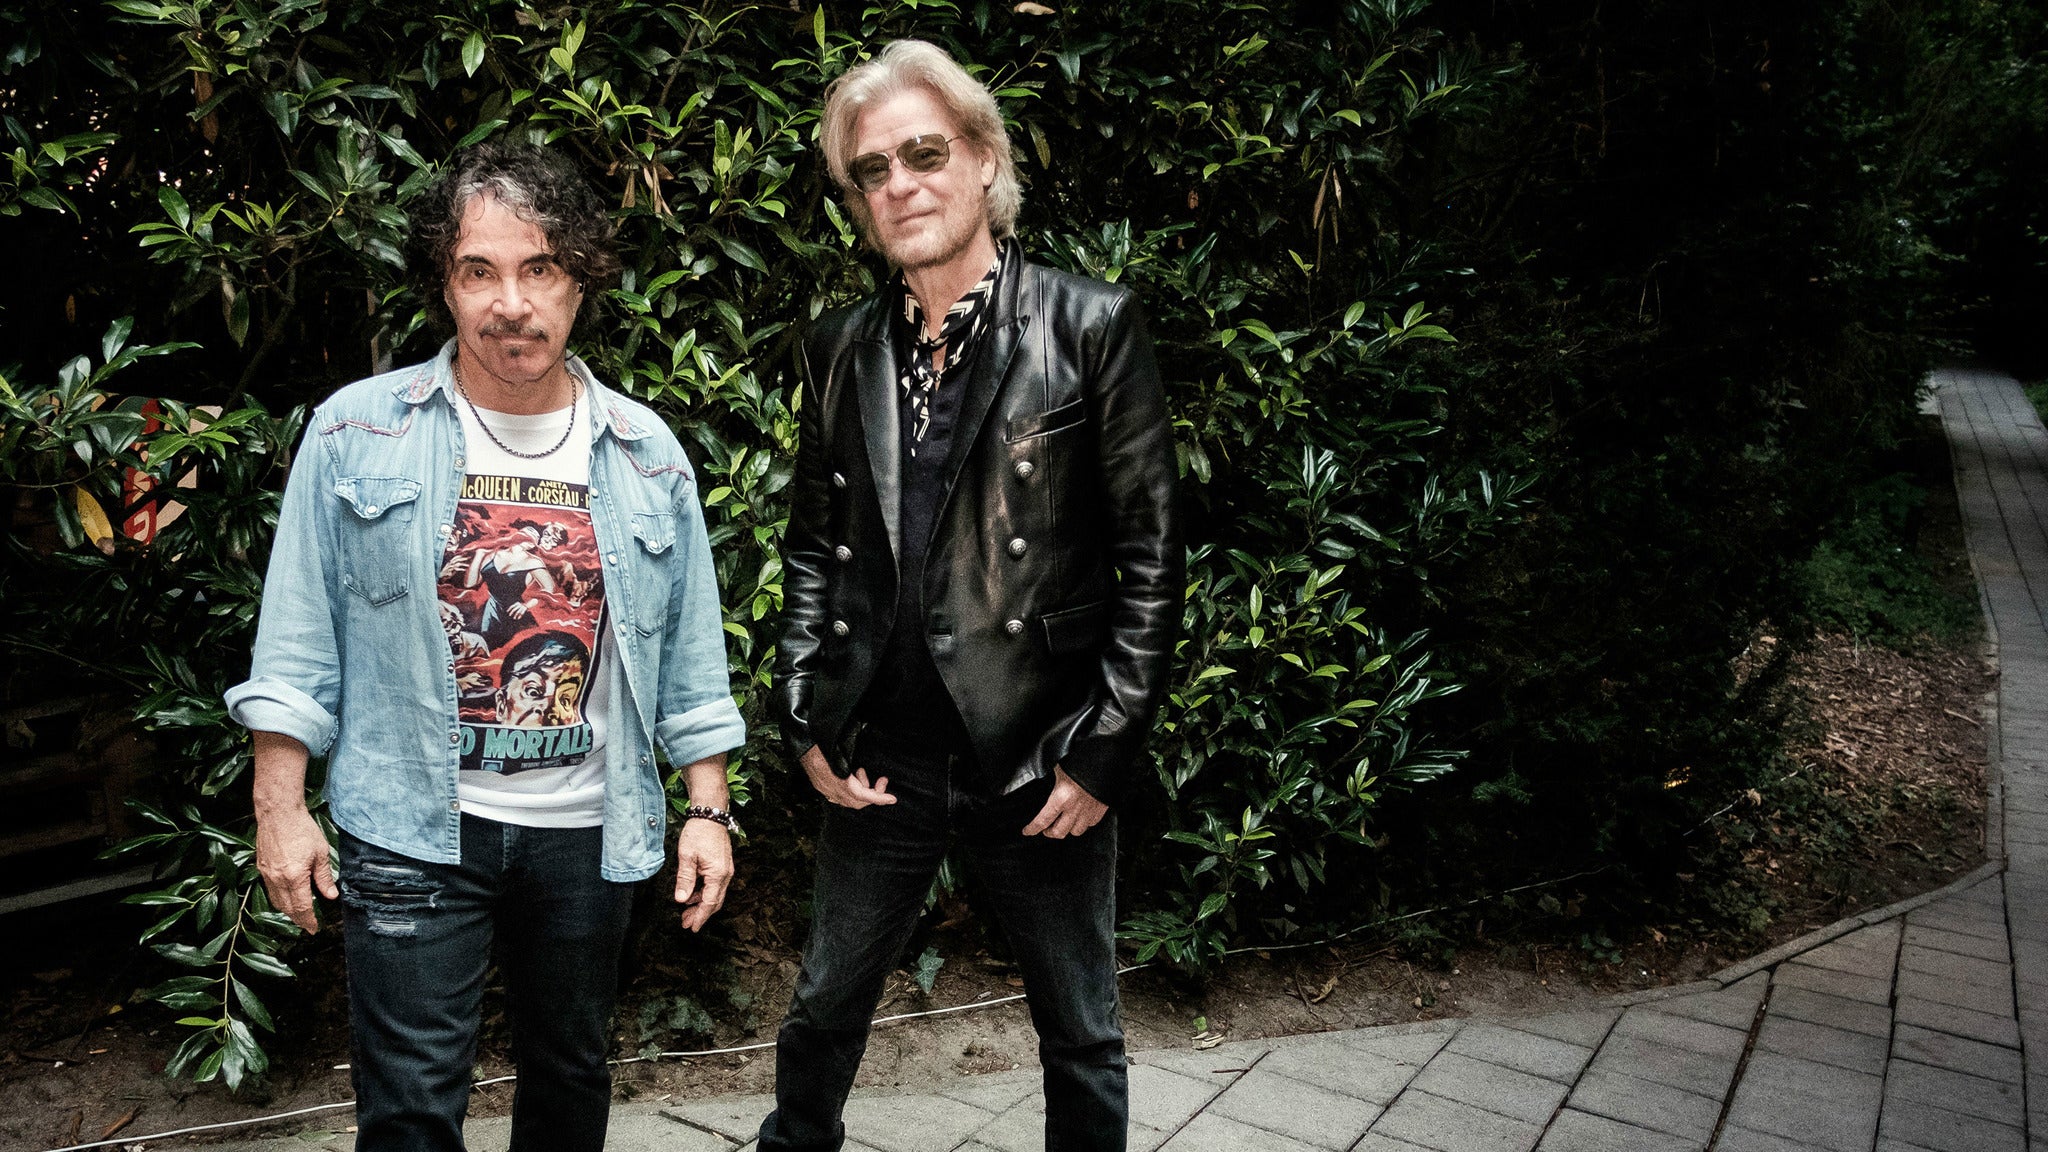 Daryl Hall & John Oates at Nugget Event Center